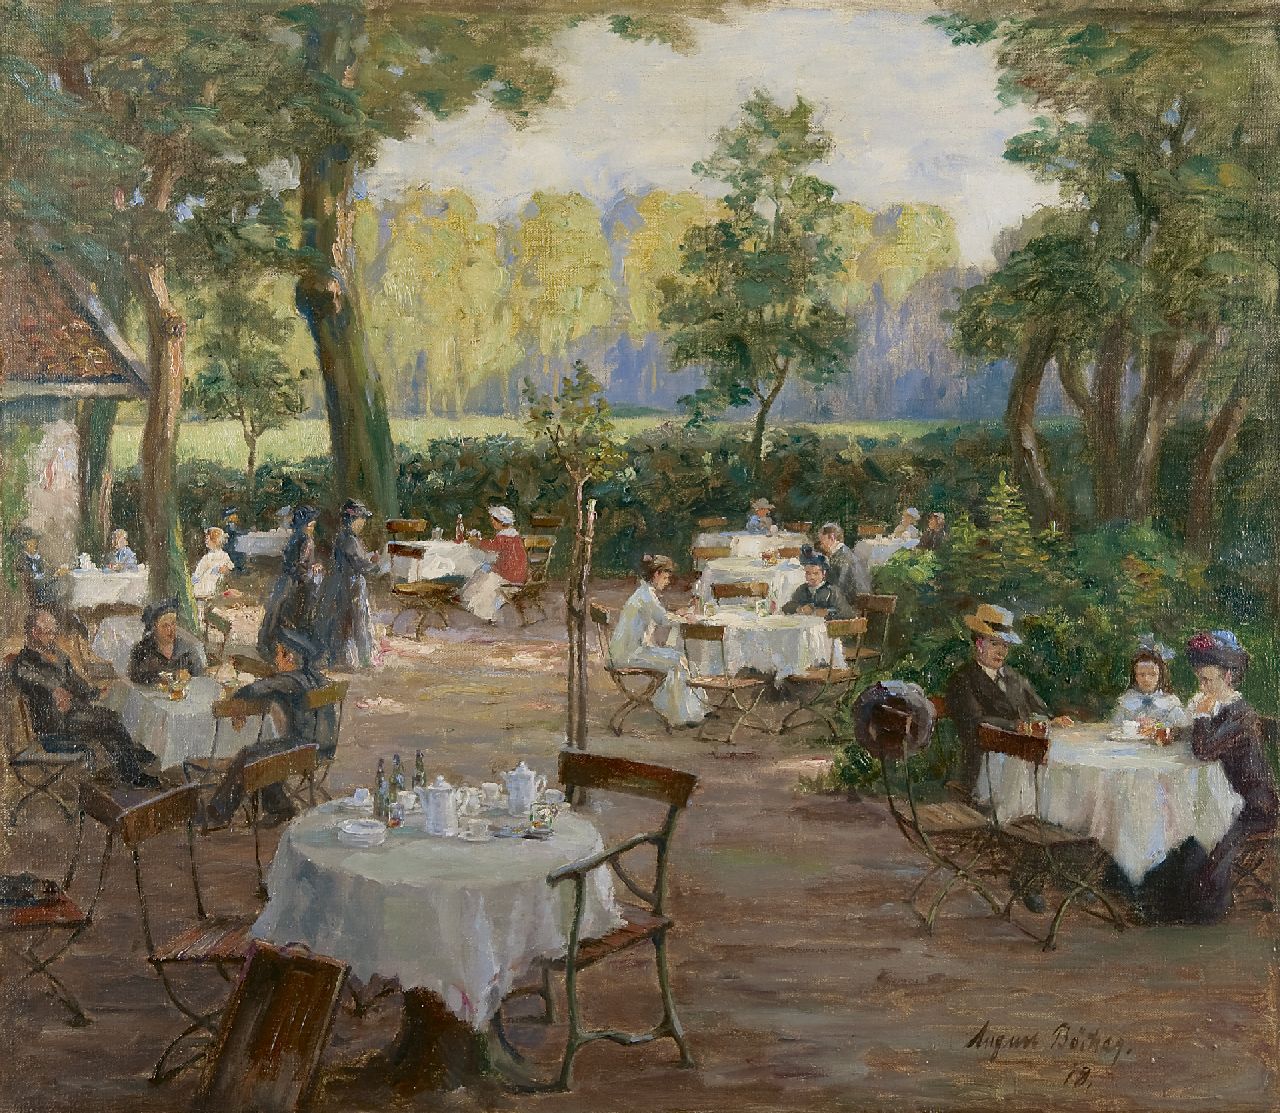 Böcher A.  | August Böcher, Afternoon in a garden café, oil on canvas 73.9 x 84.2 cm, signed l.r. and dated '18